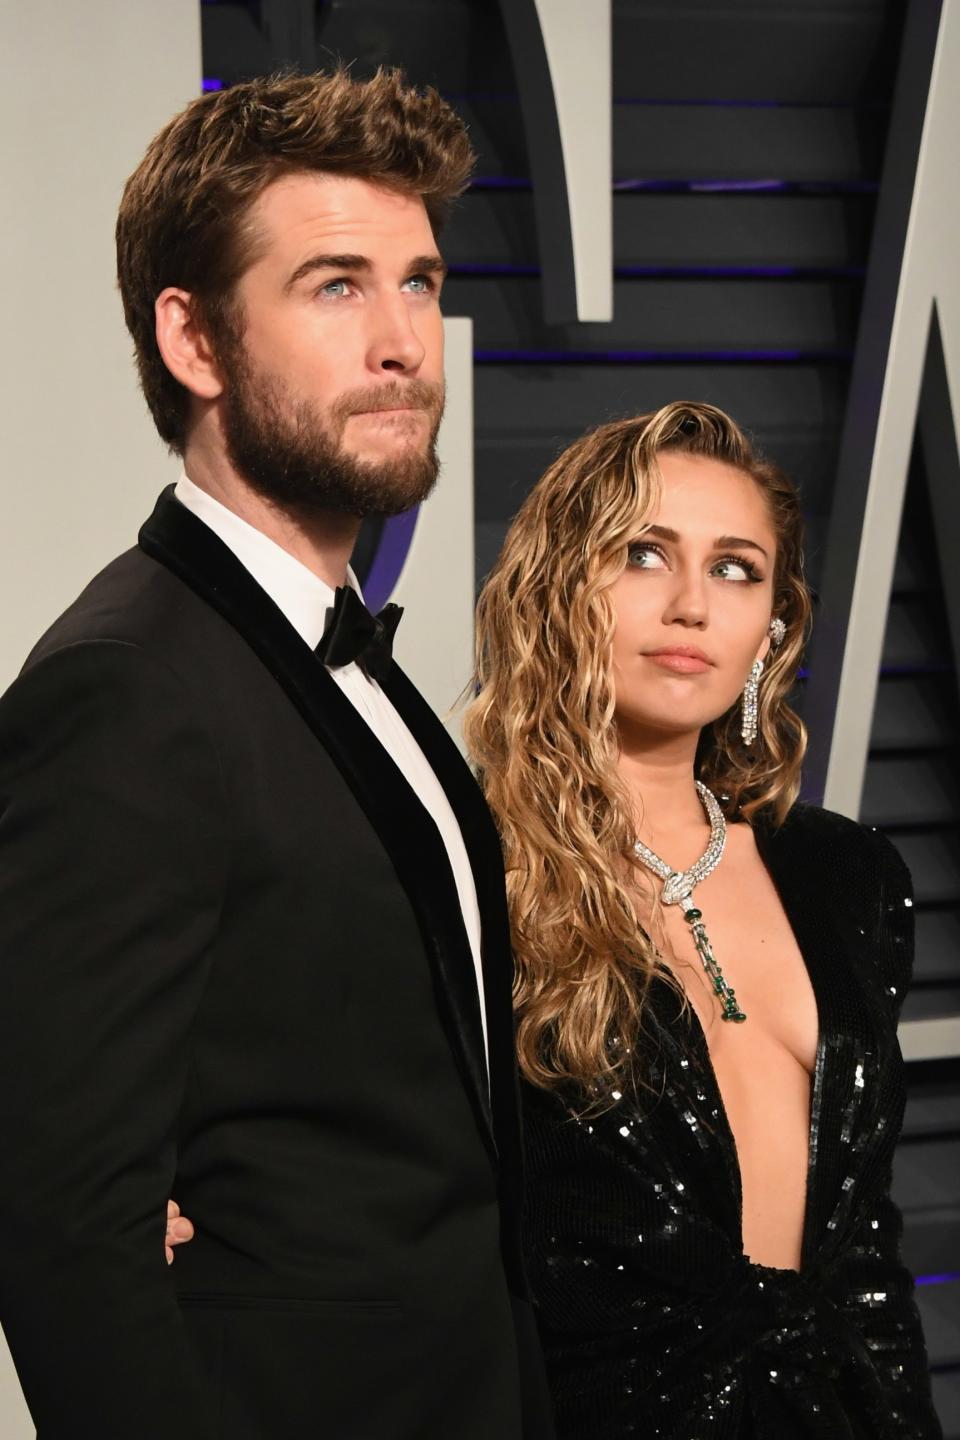 Cyrus and Hemsworth in 2019